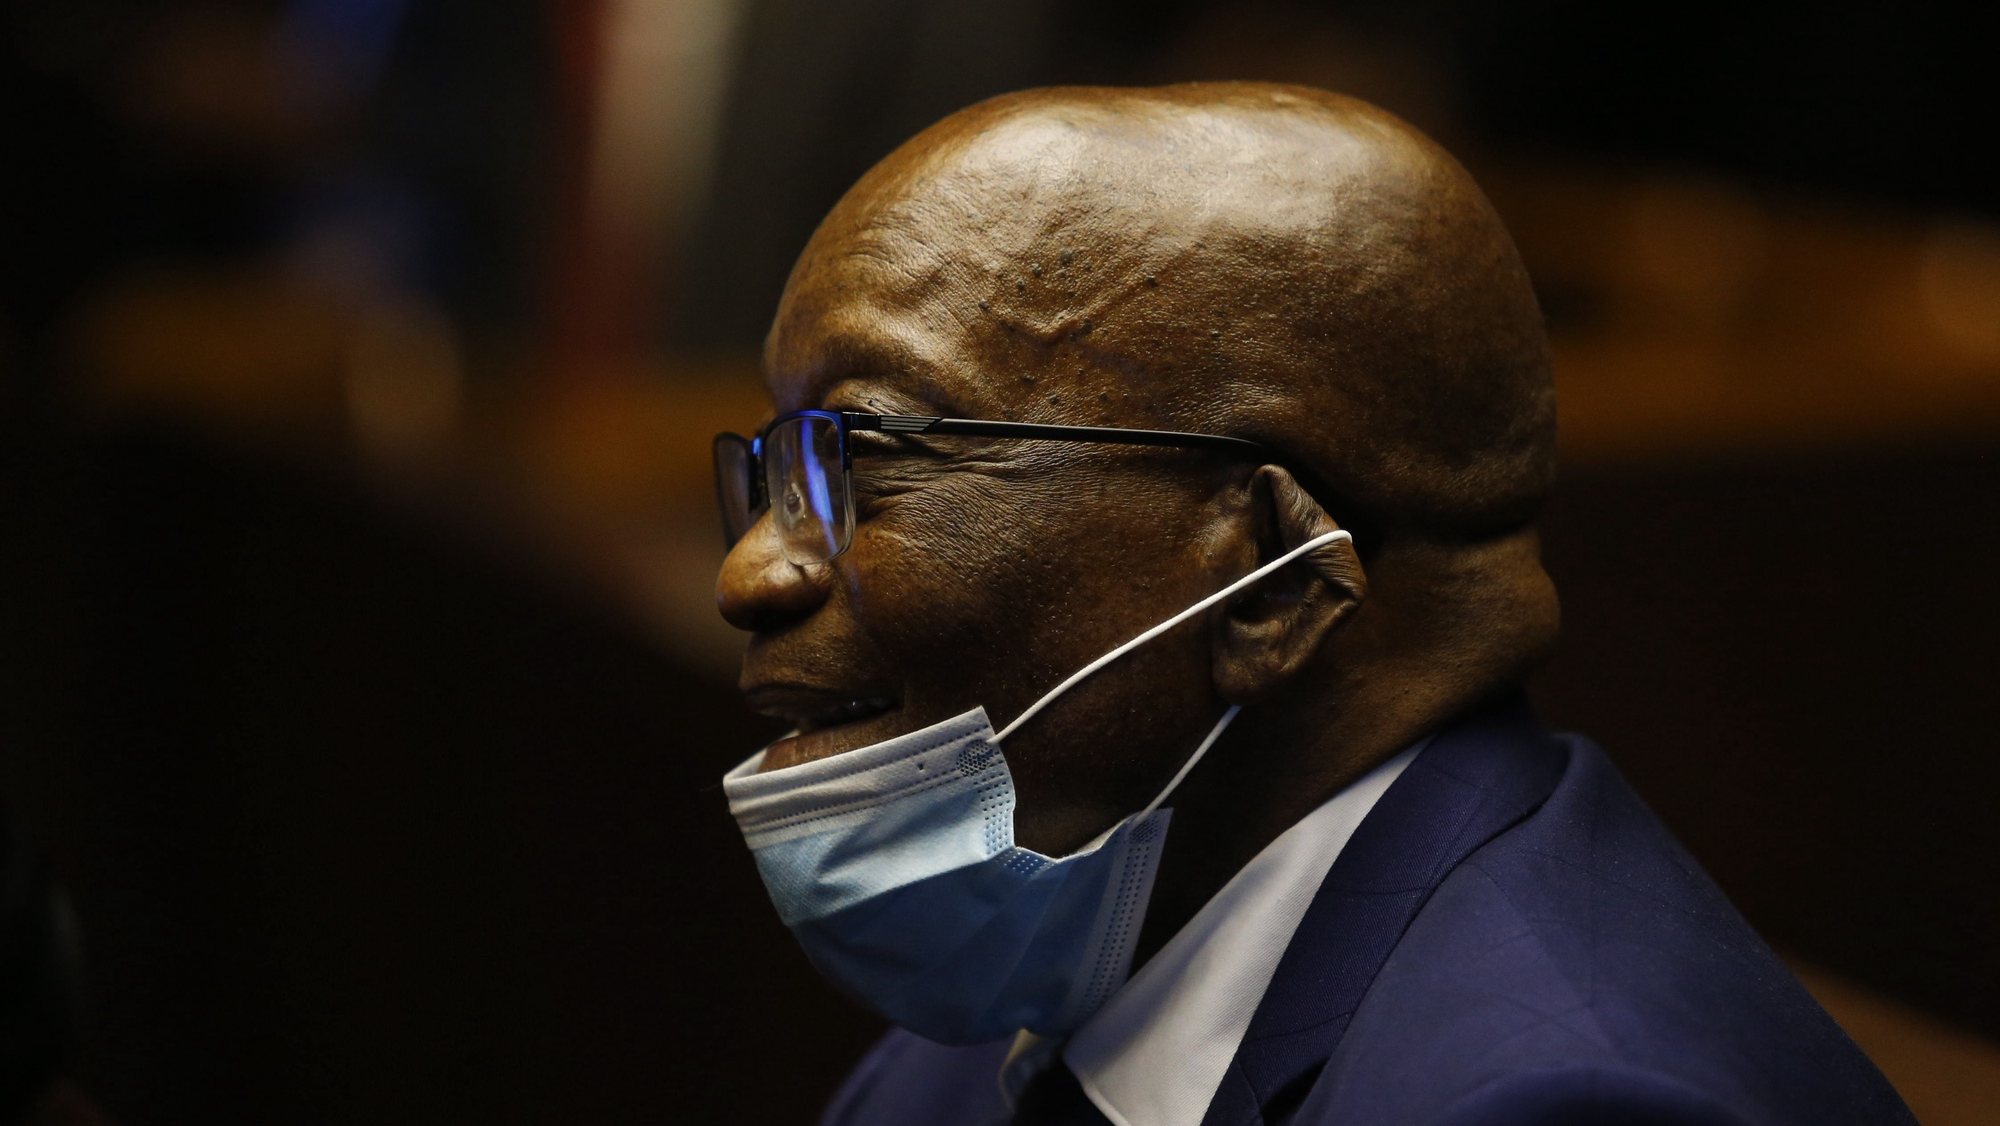 epa09206227 Former South African President Jacob Zuma appears in the Pietermaritzburg High Court, in Pietermaritzburg, South Africa, 17 May 2021. The former President is facing corruption charges related to arms deals that happened during this presidency.  EPA/ROGAN WARD / POOL